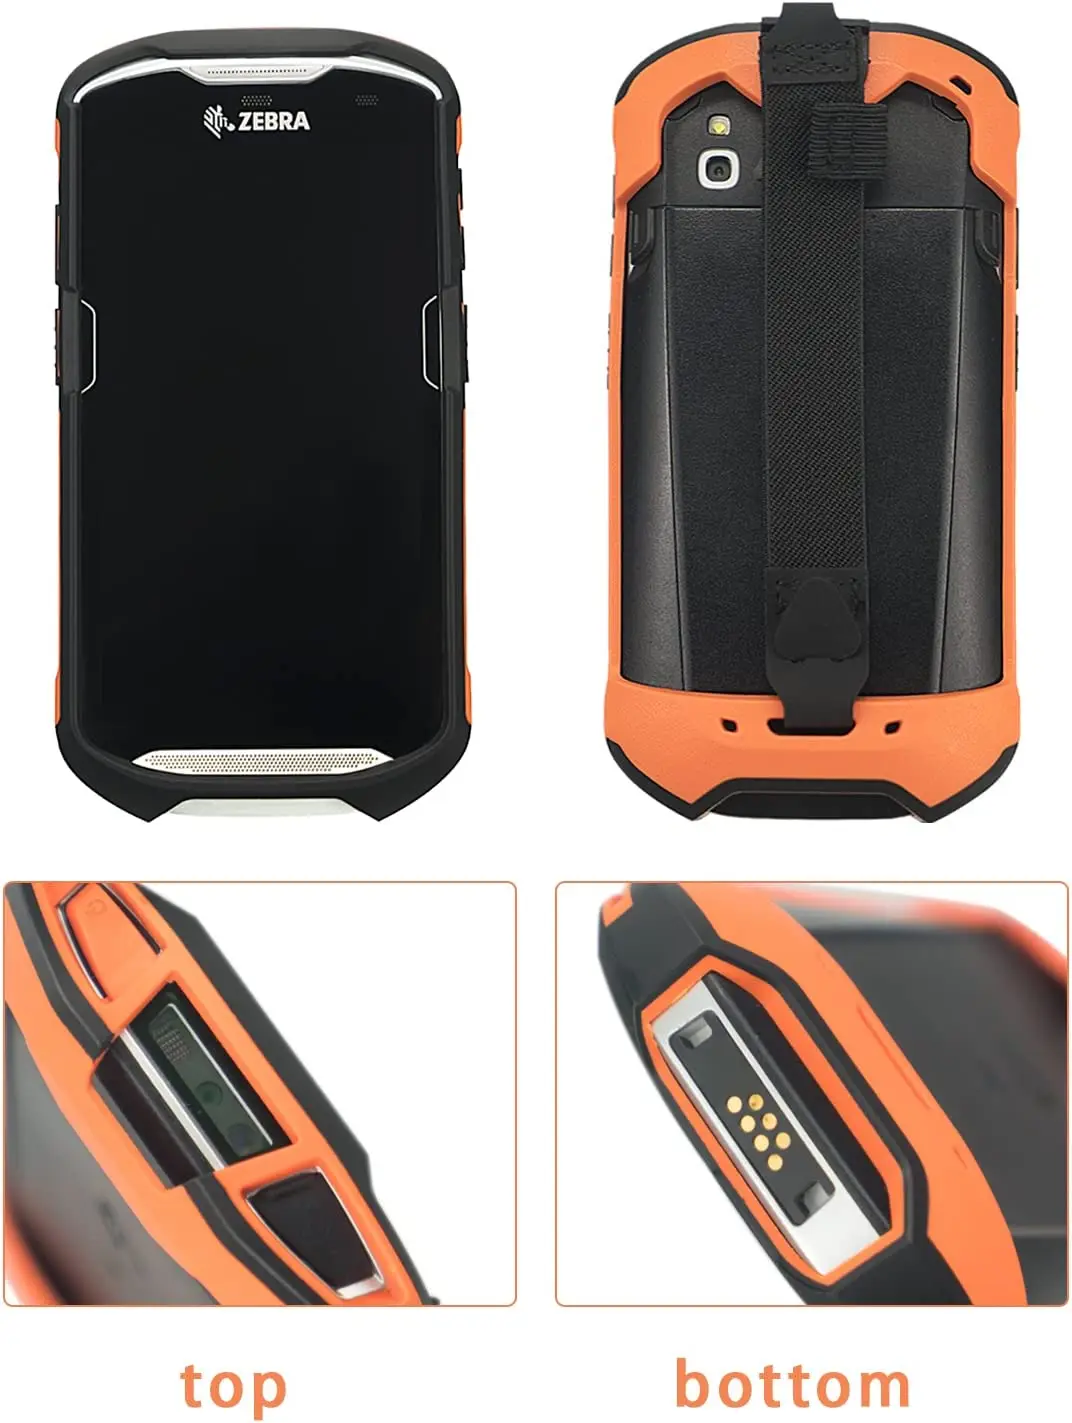 Protective Cover Case Rugged Boot with Hand Strap for Zebra TC51 TC52 TC56  TC57 TC510K,Scanner Accessories (Orange)